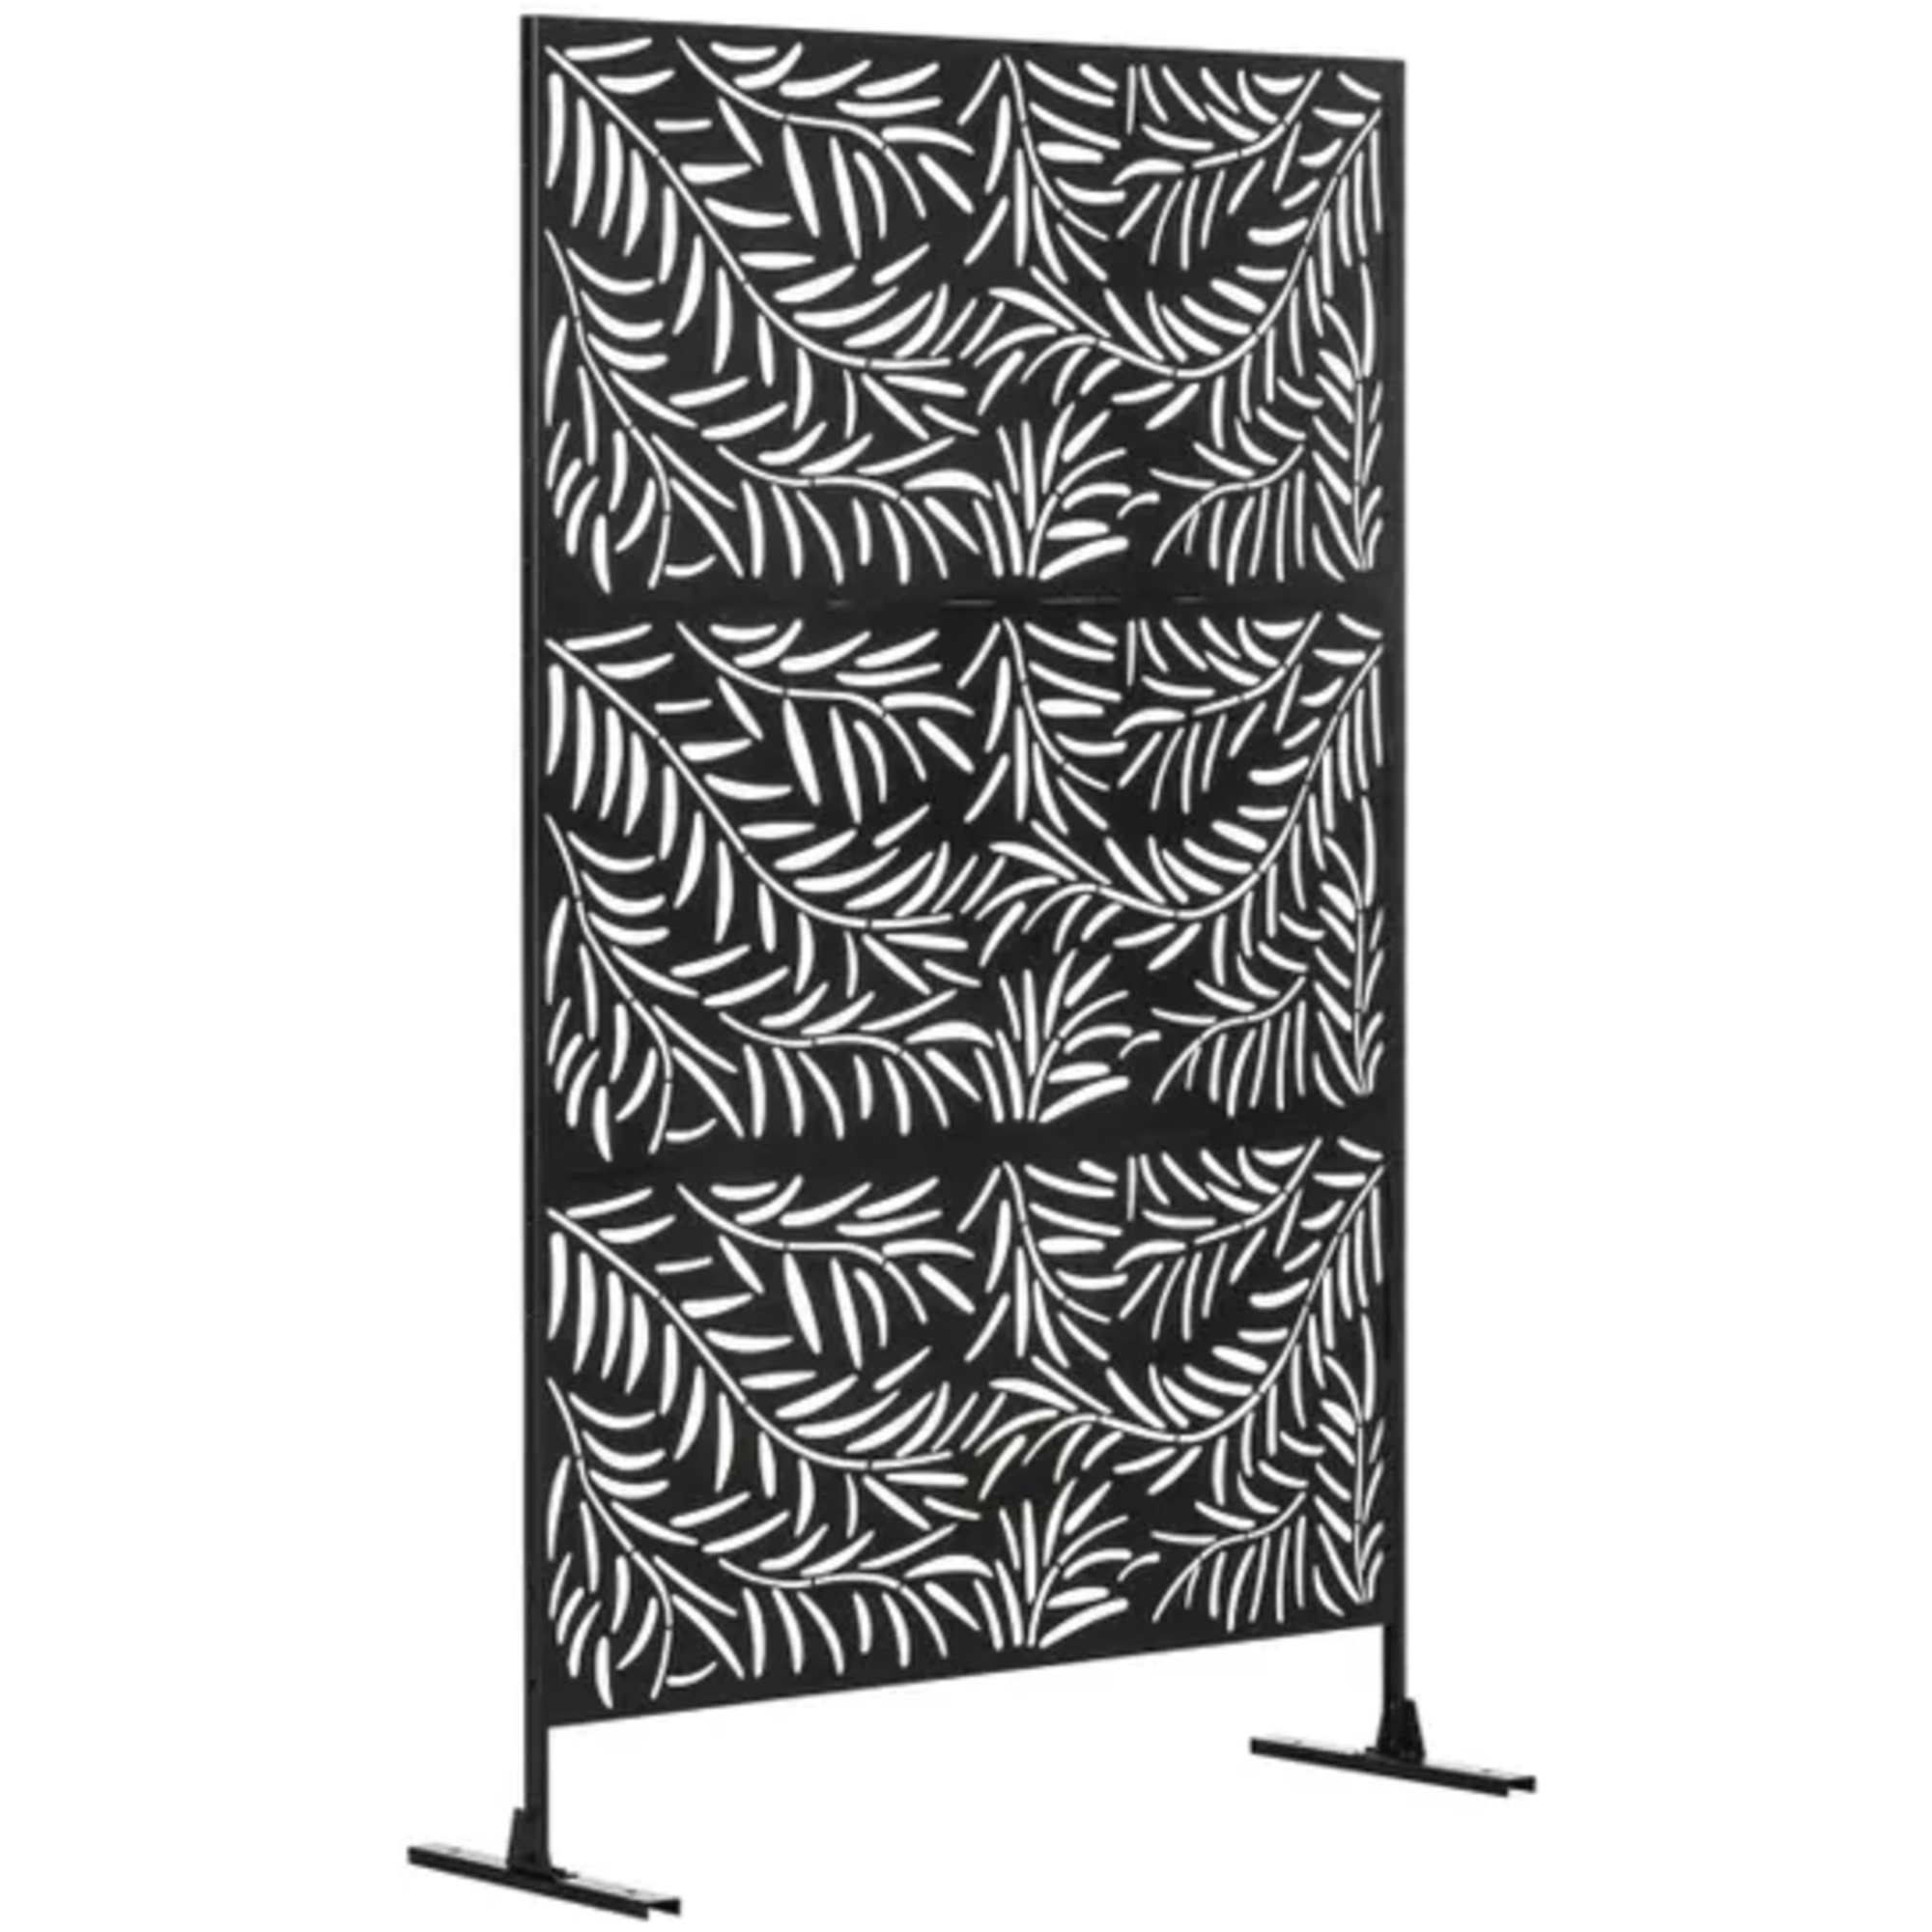 Outsunny 6.5ft Metal Privacy Screen w/ Stand, Expand Screws